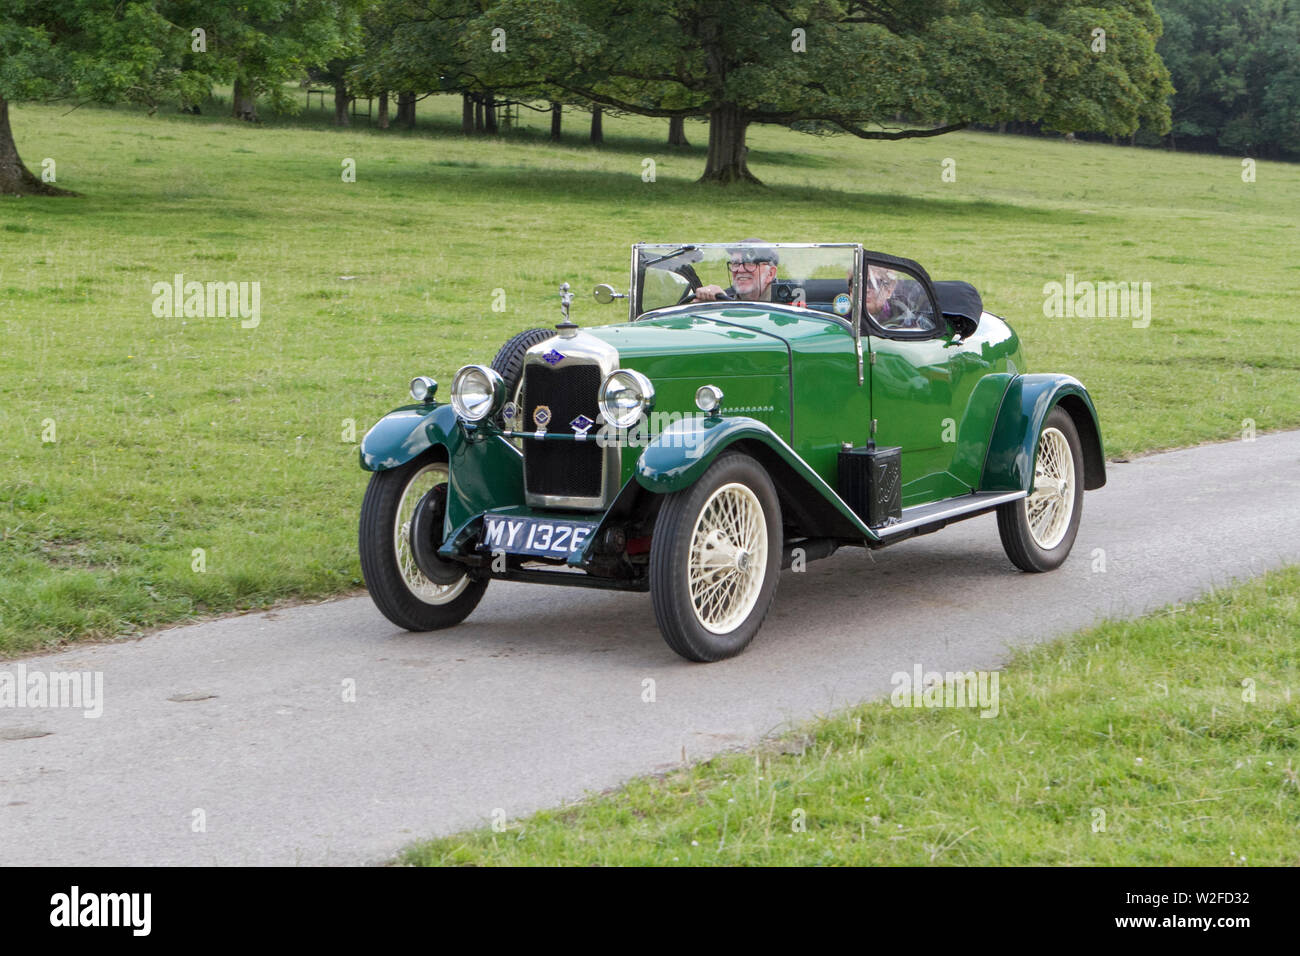 Motoring classics, historics, vintage motors and collectibles 2019; Leighton Hall transport show, collection of cars & veteran vehicles of yesteryear. Stock Photo